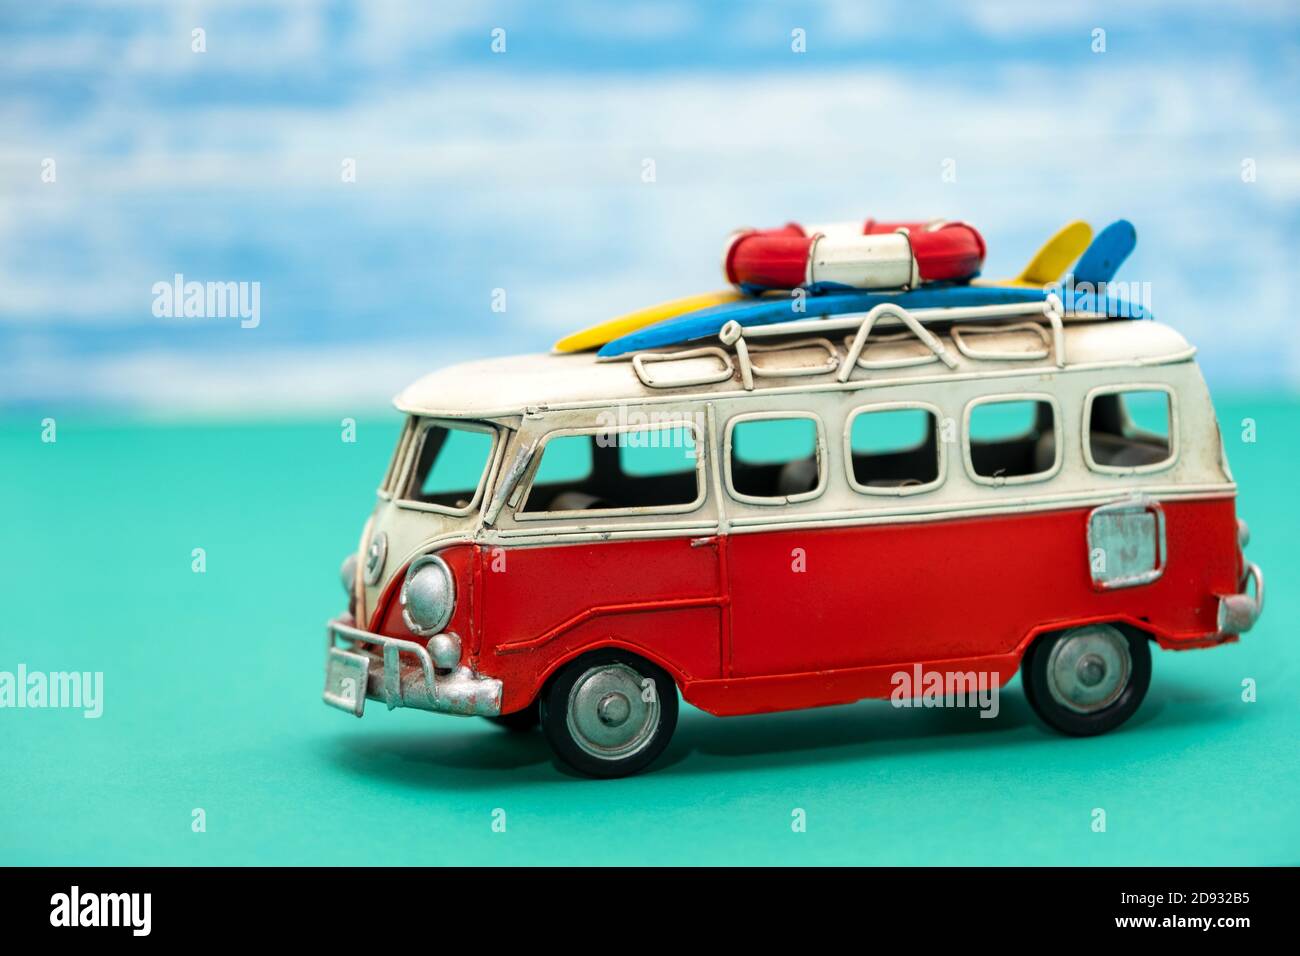 Vintage toy VW minibus with surfboards in front of a blurred background. Stock Photo